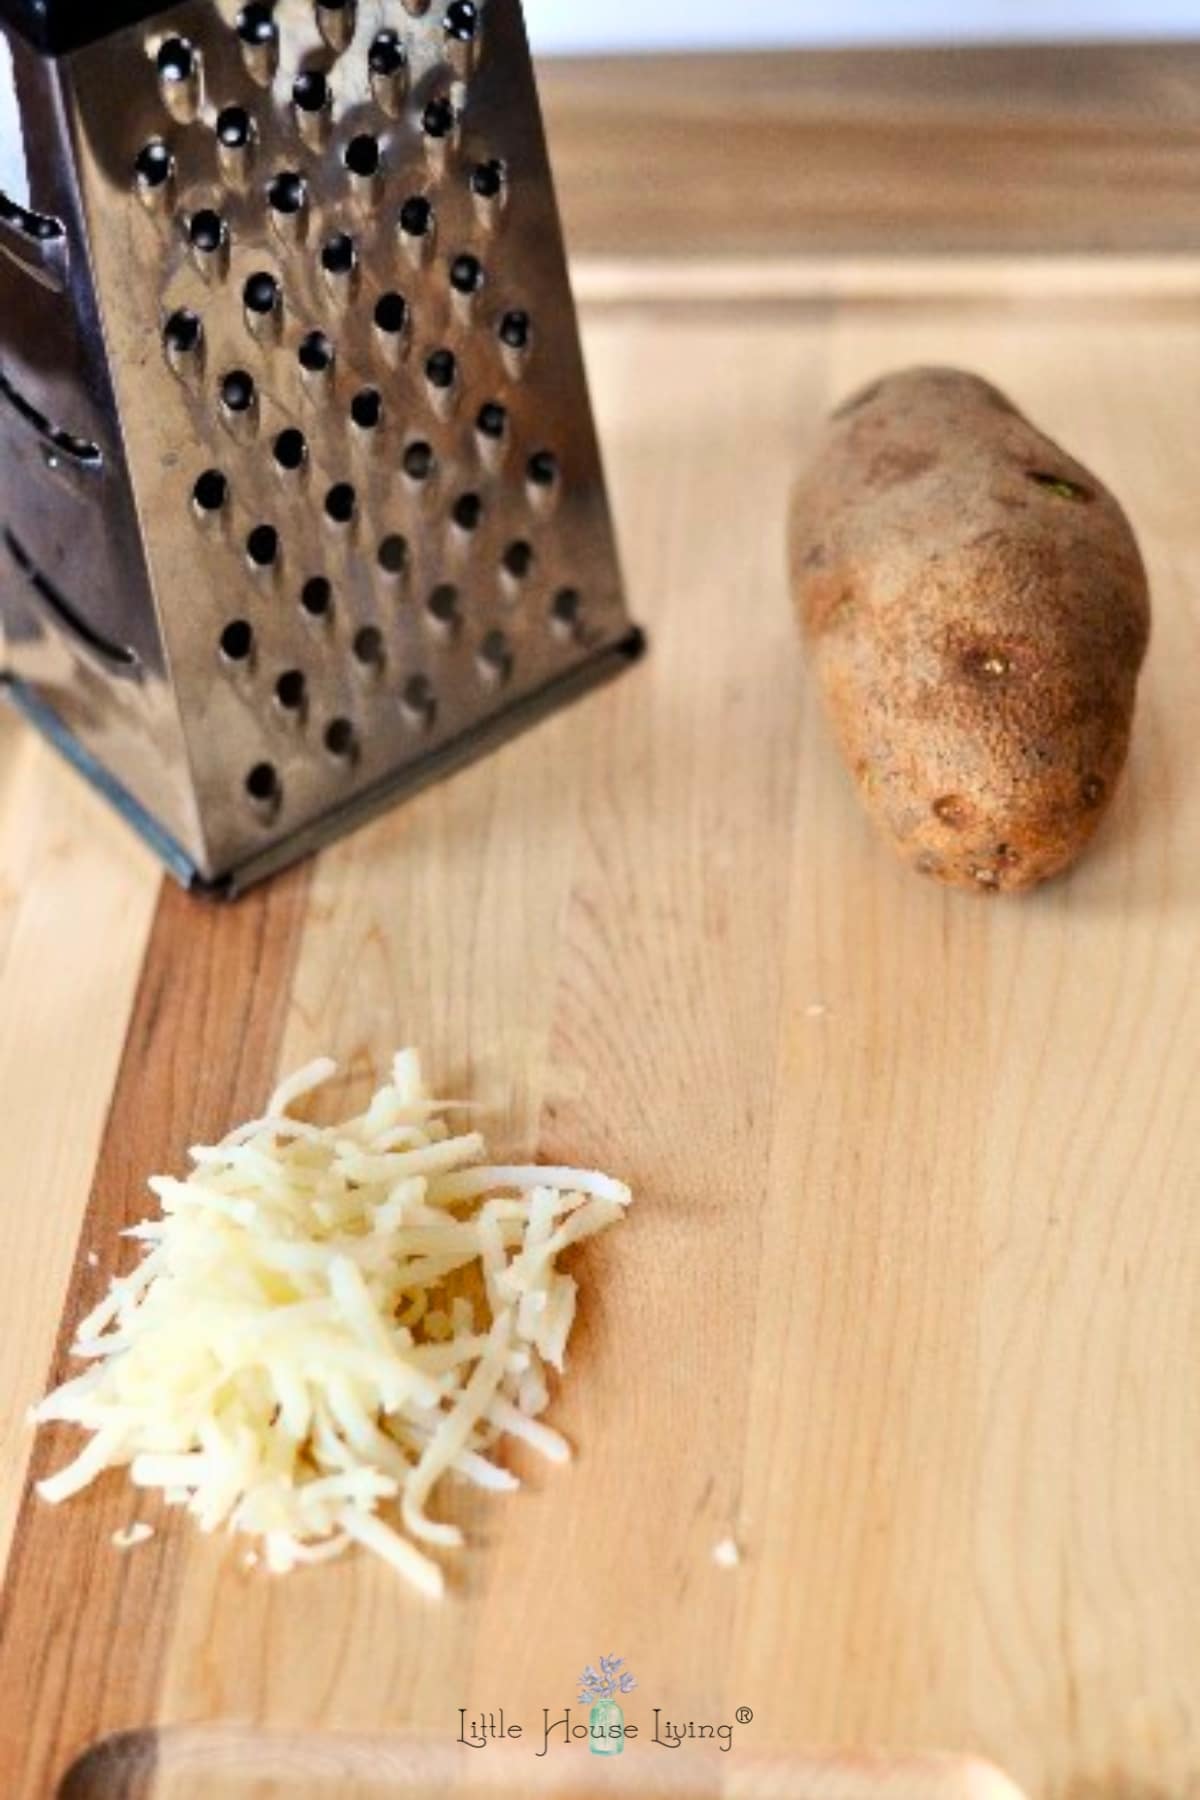 a box grater, whole potato and pile of shredded potato on a wooden cutting board